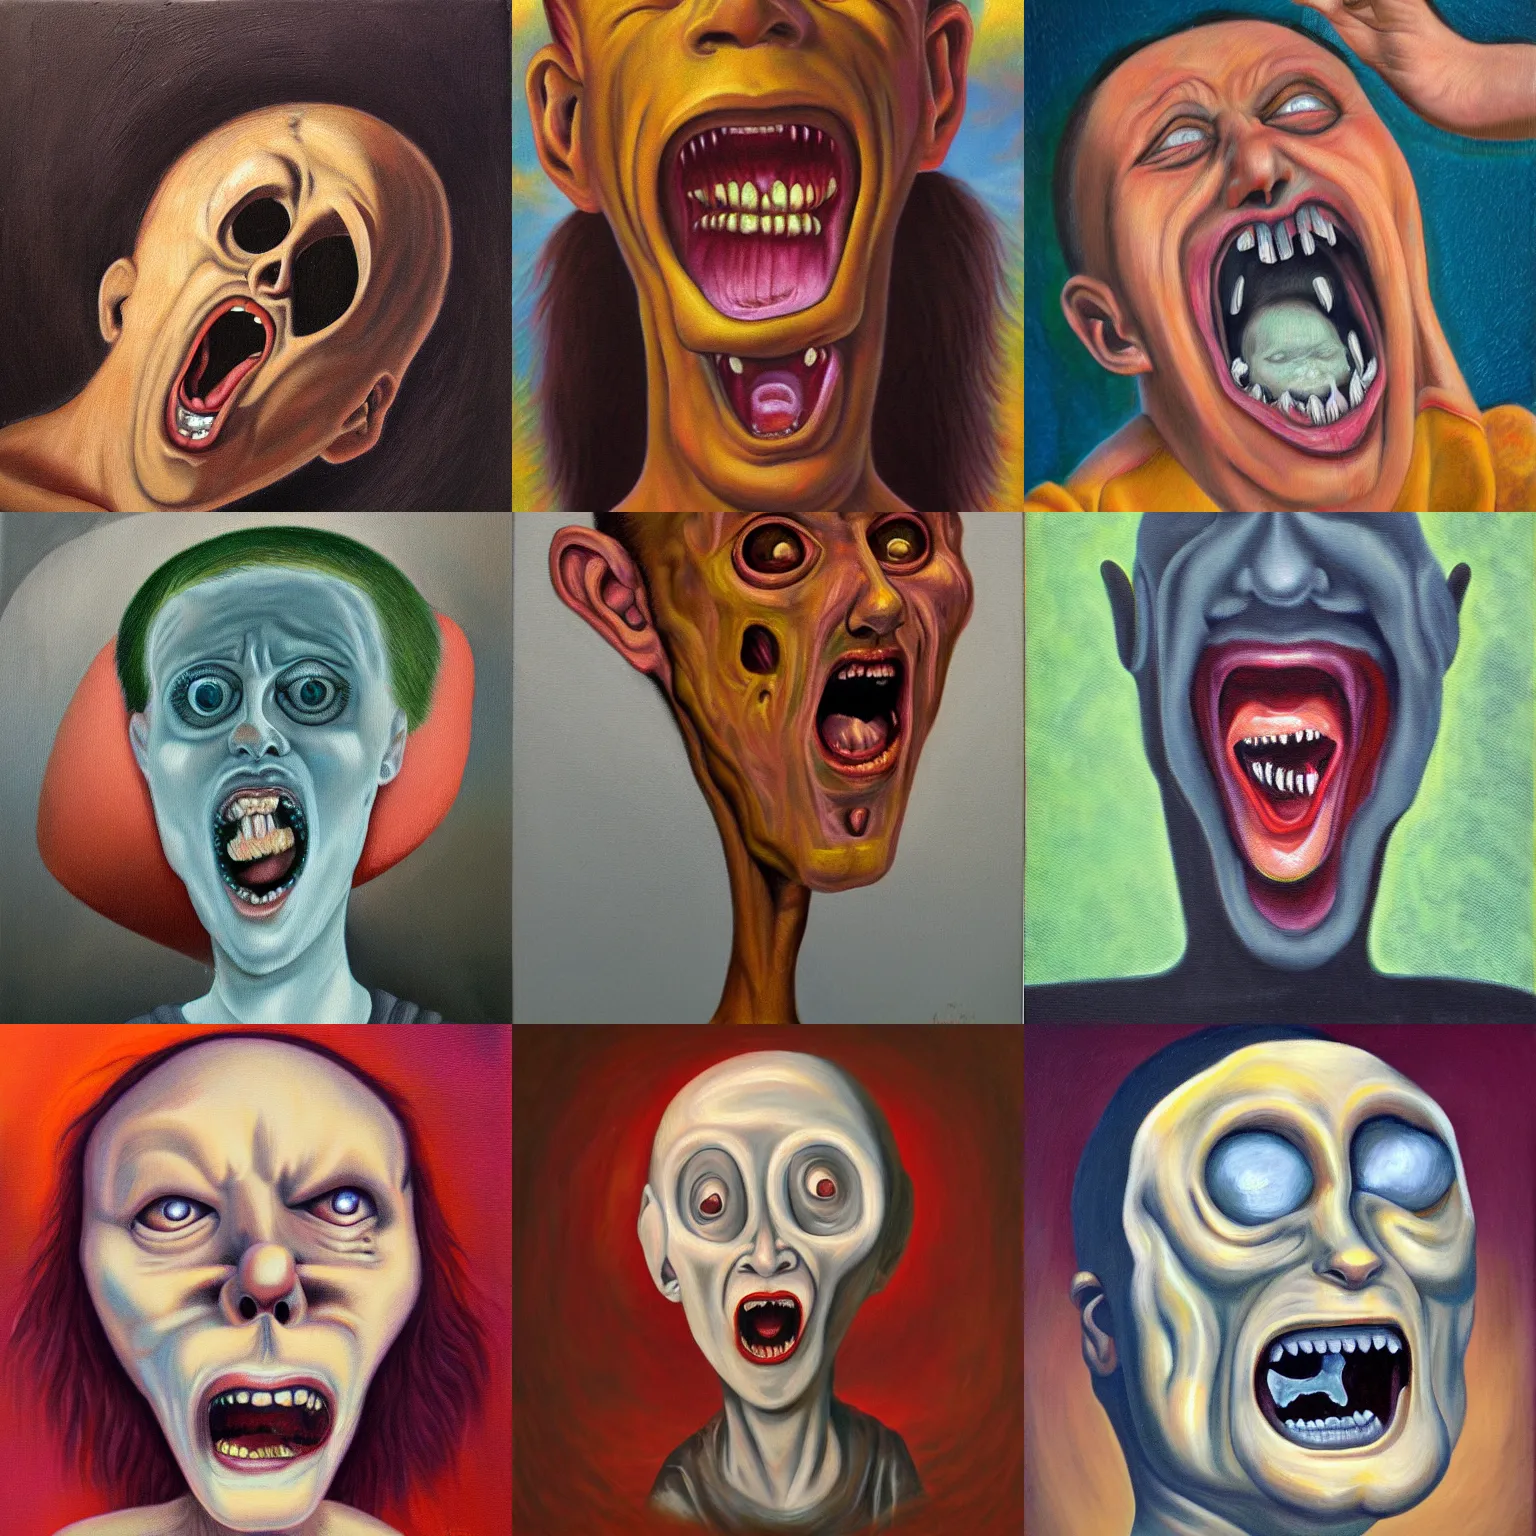 Prompt: A disembodied head screaming, oil painting, surrealism style